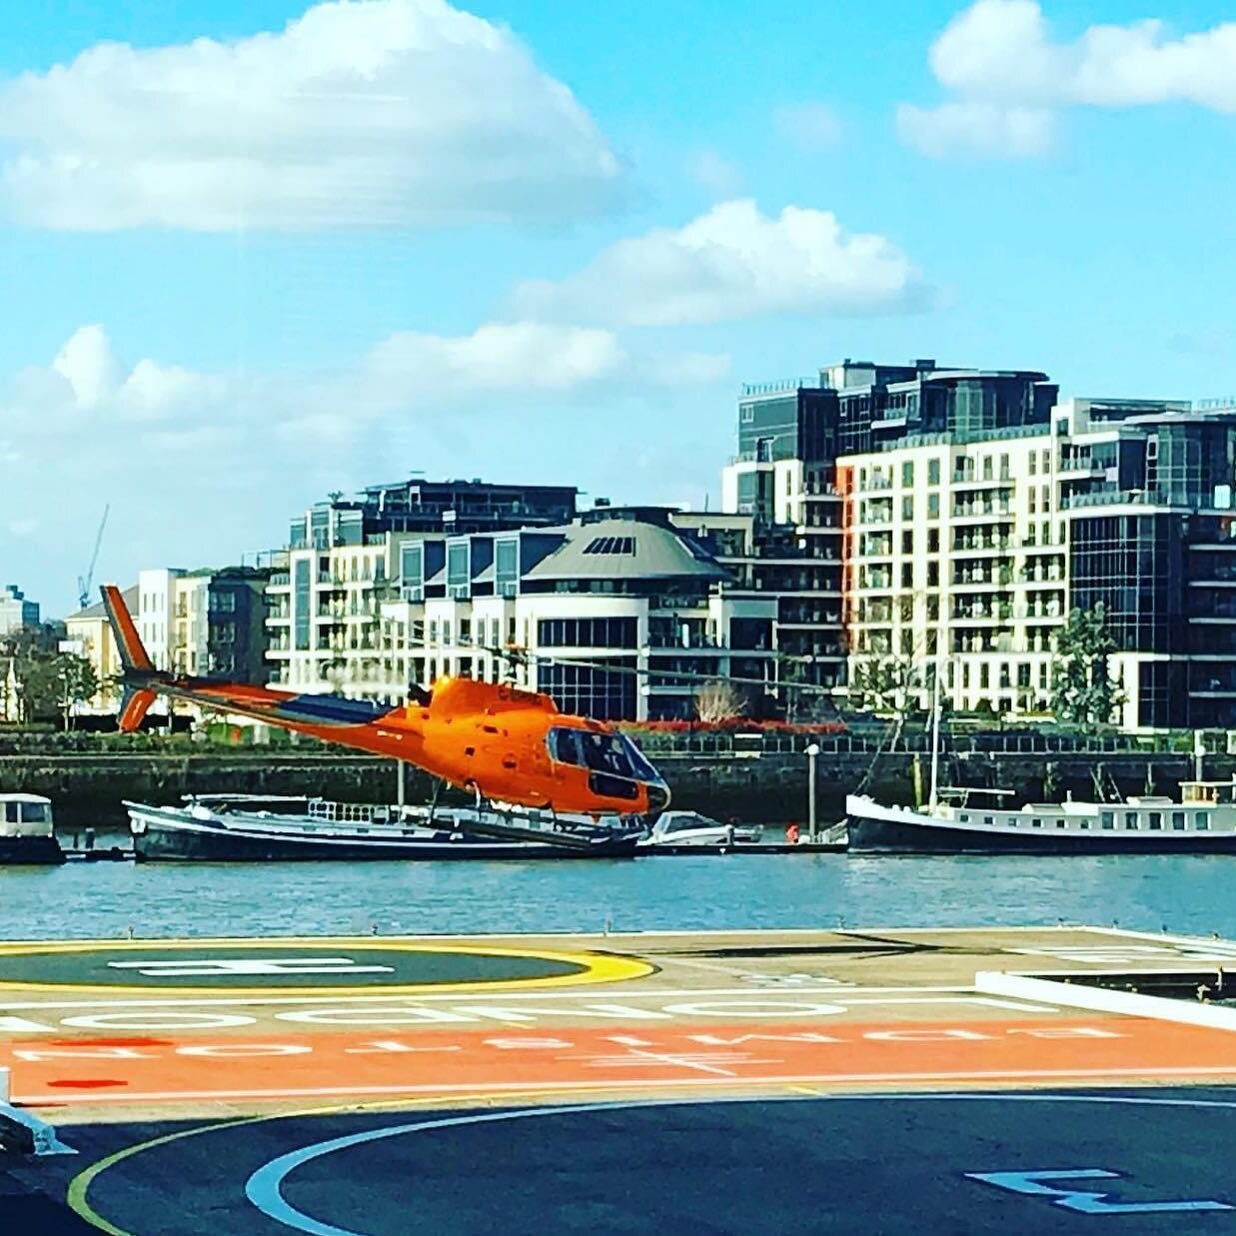 GREAT NEWS!! It has been announced that the London Heliport is due to reopen as of the 26th May!! 🚁

Call us on 01273 440288 or book online at www.a2bhelicharters.co.uk